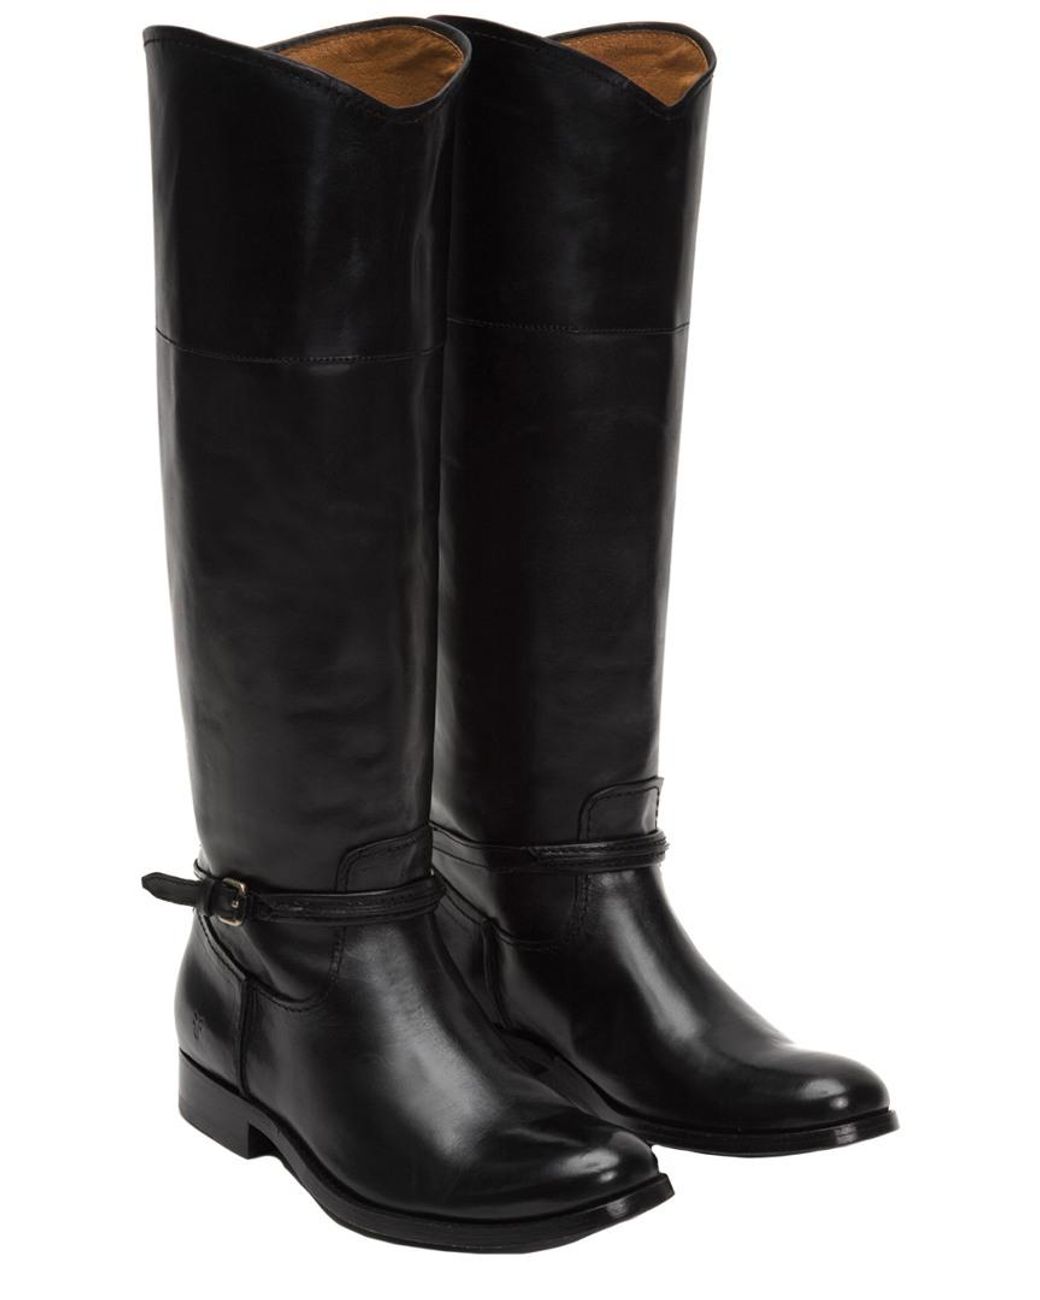 Frye Leather Melissa Seam Tall Boot in Black - Lyst